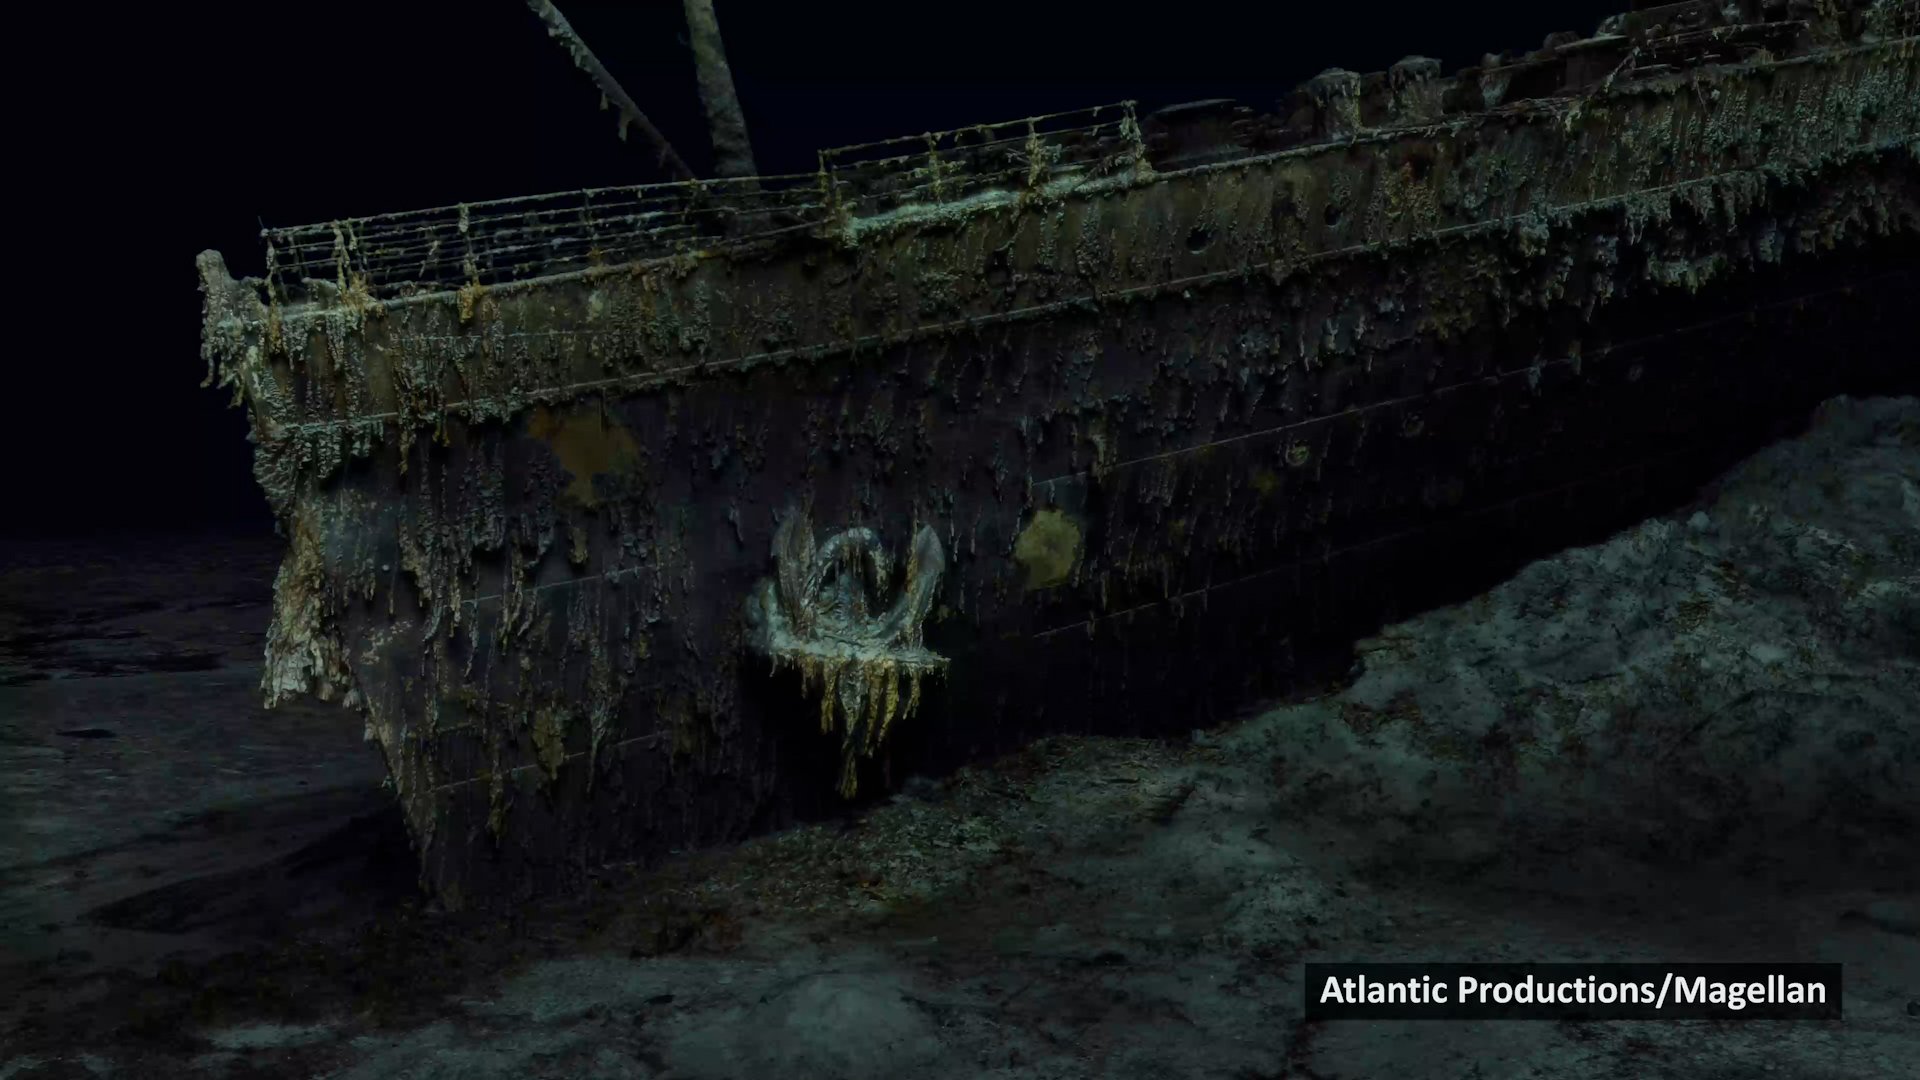 New 3D scans uncover Titanic shipwreck in extraordinary detail - The  Washington Post